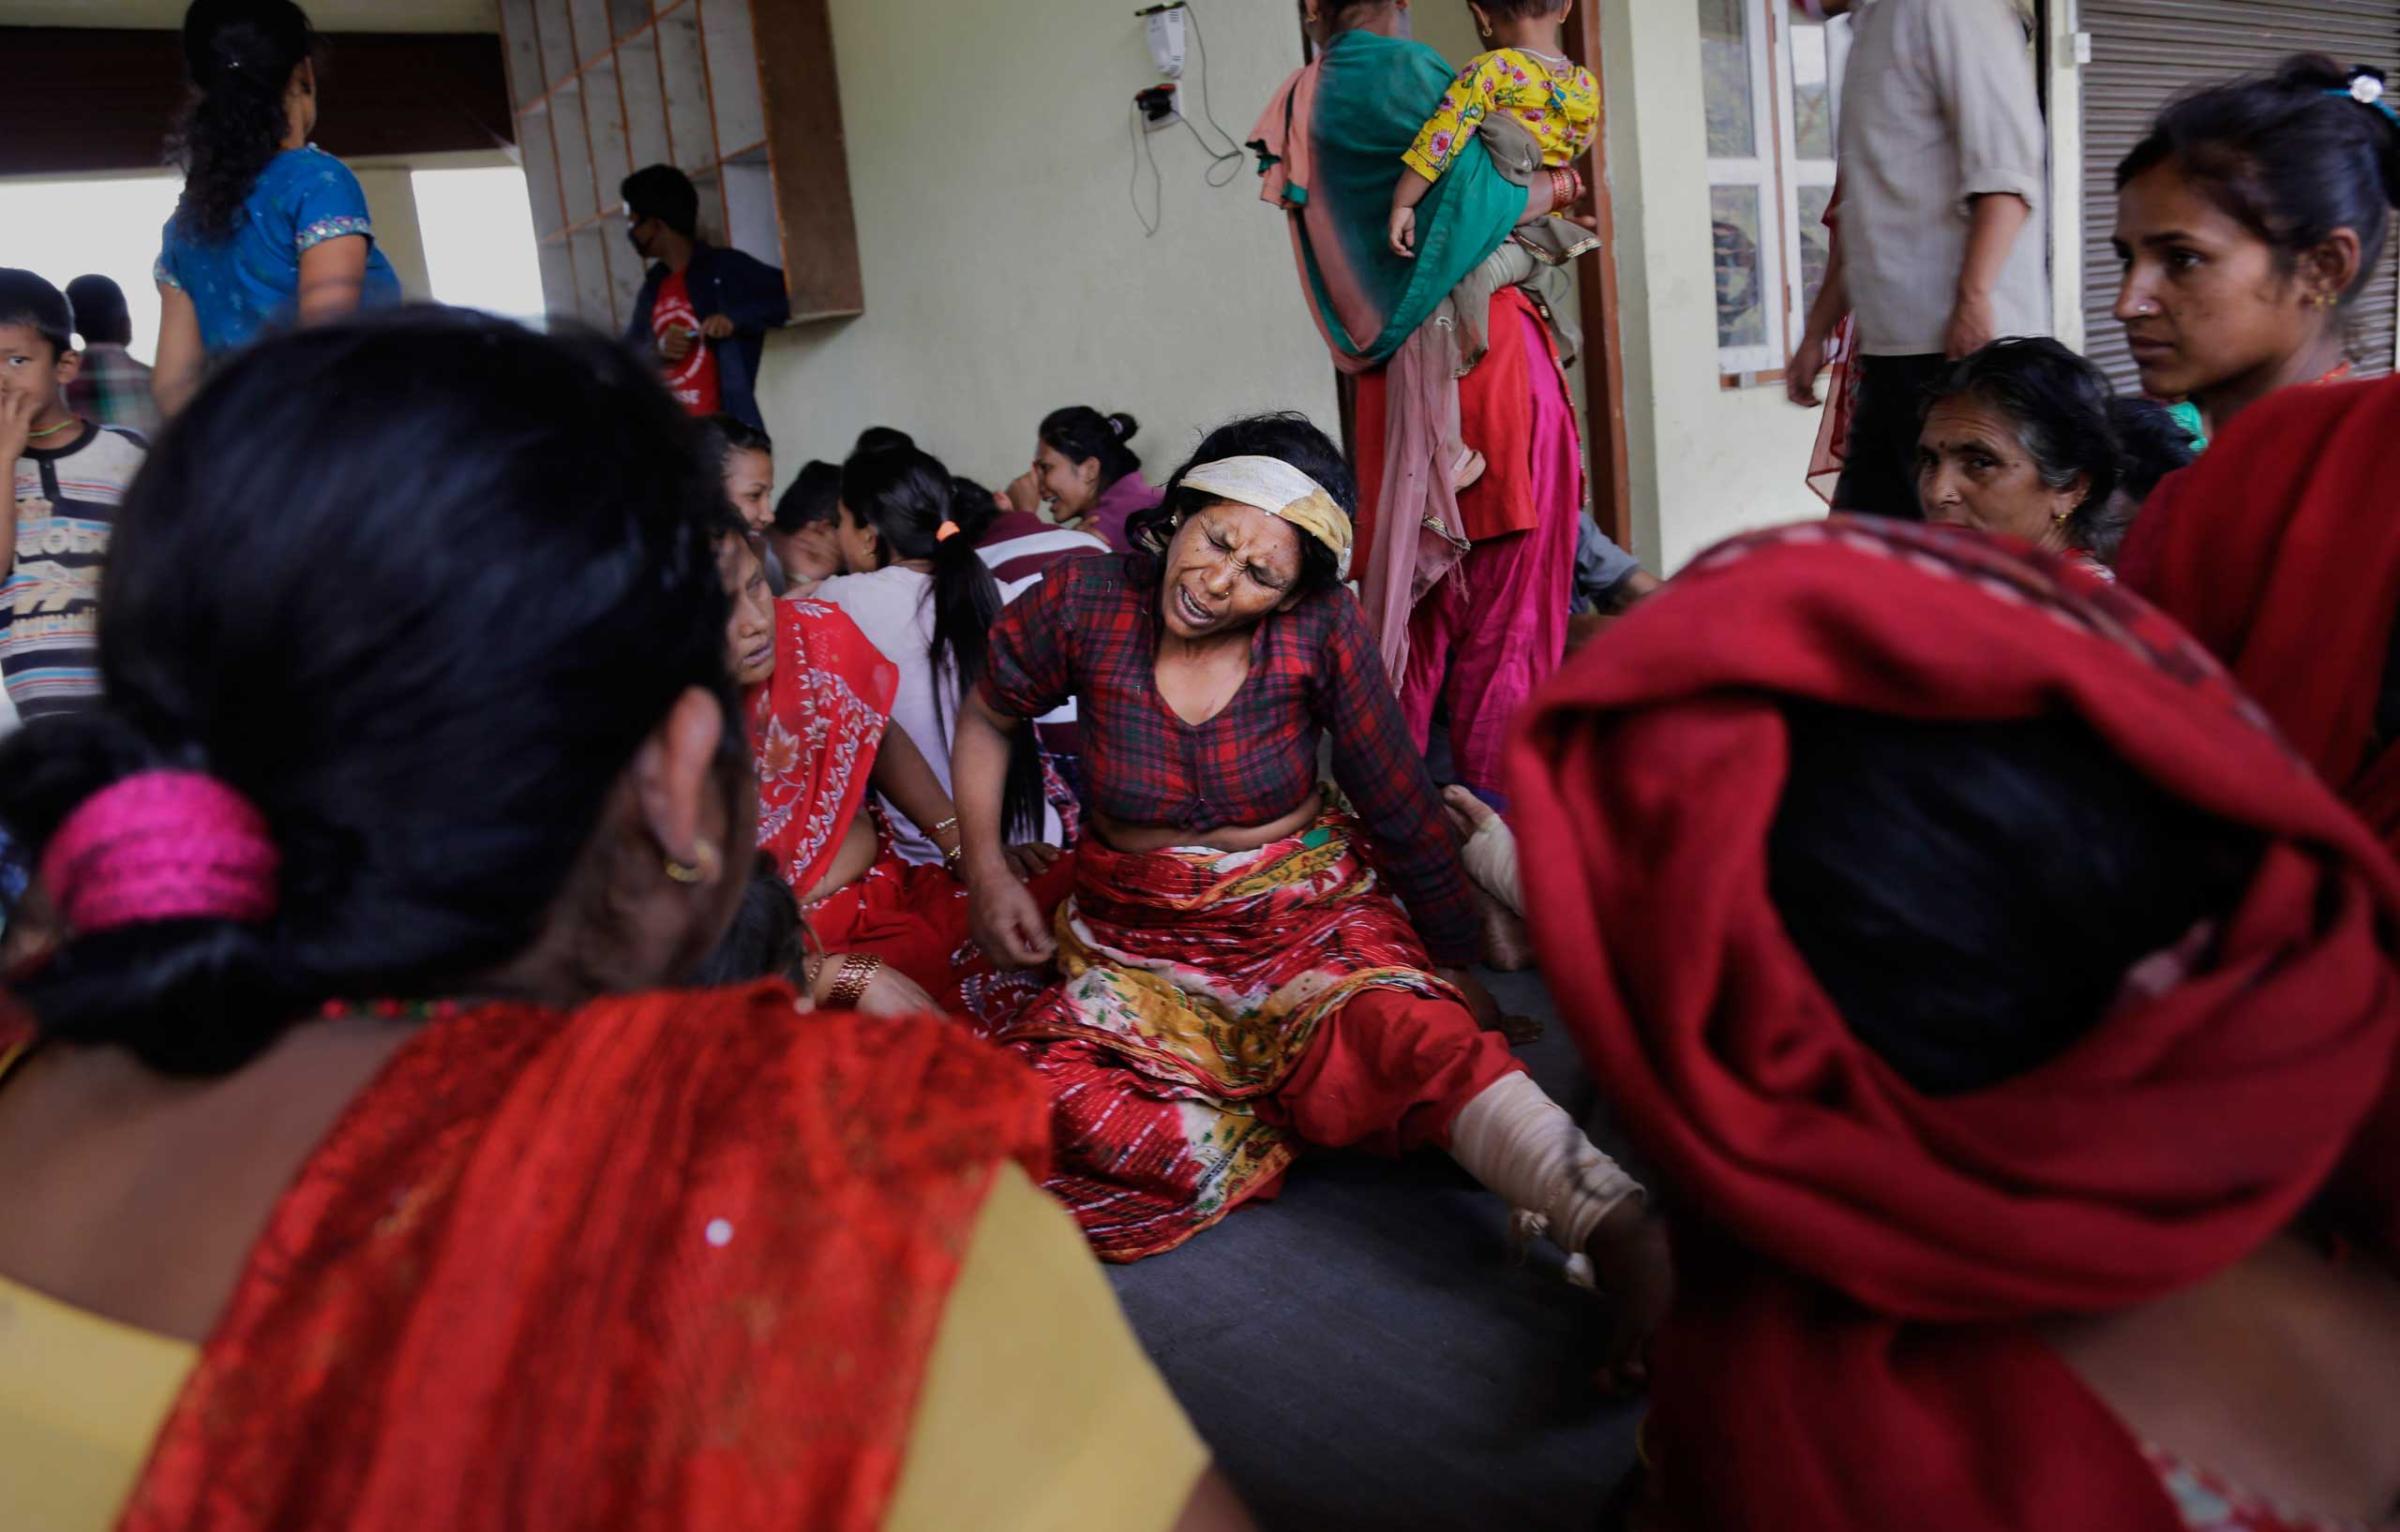 Nepalese villagers injured in Saturdayís earthquake await evacuation at Trishuli Bazar in Nepal on April 27, 2015.